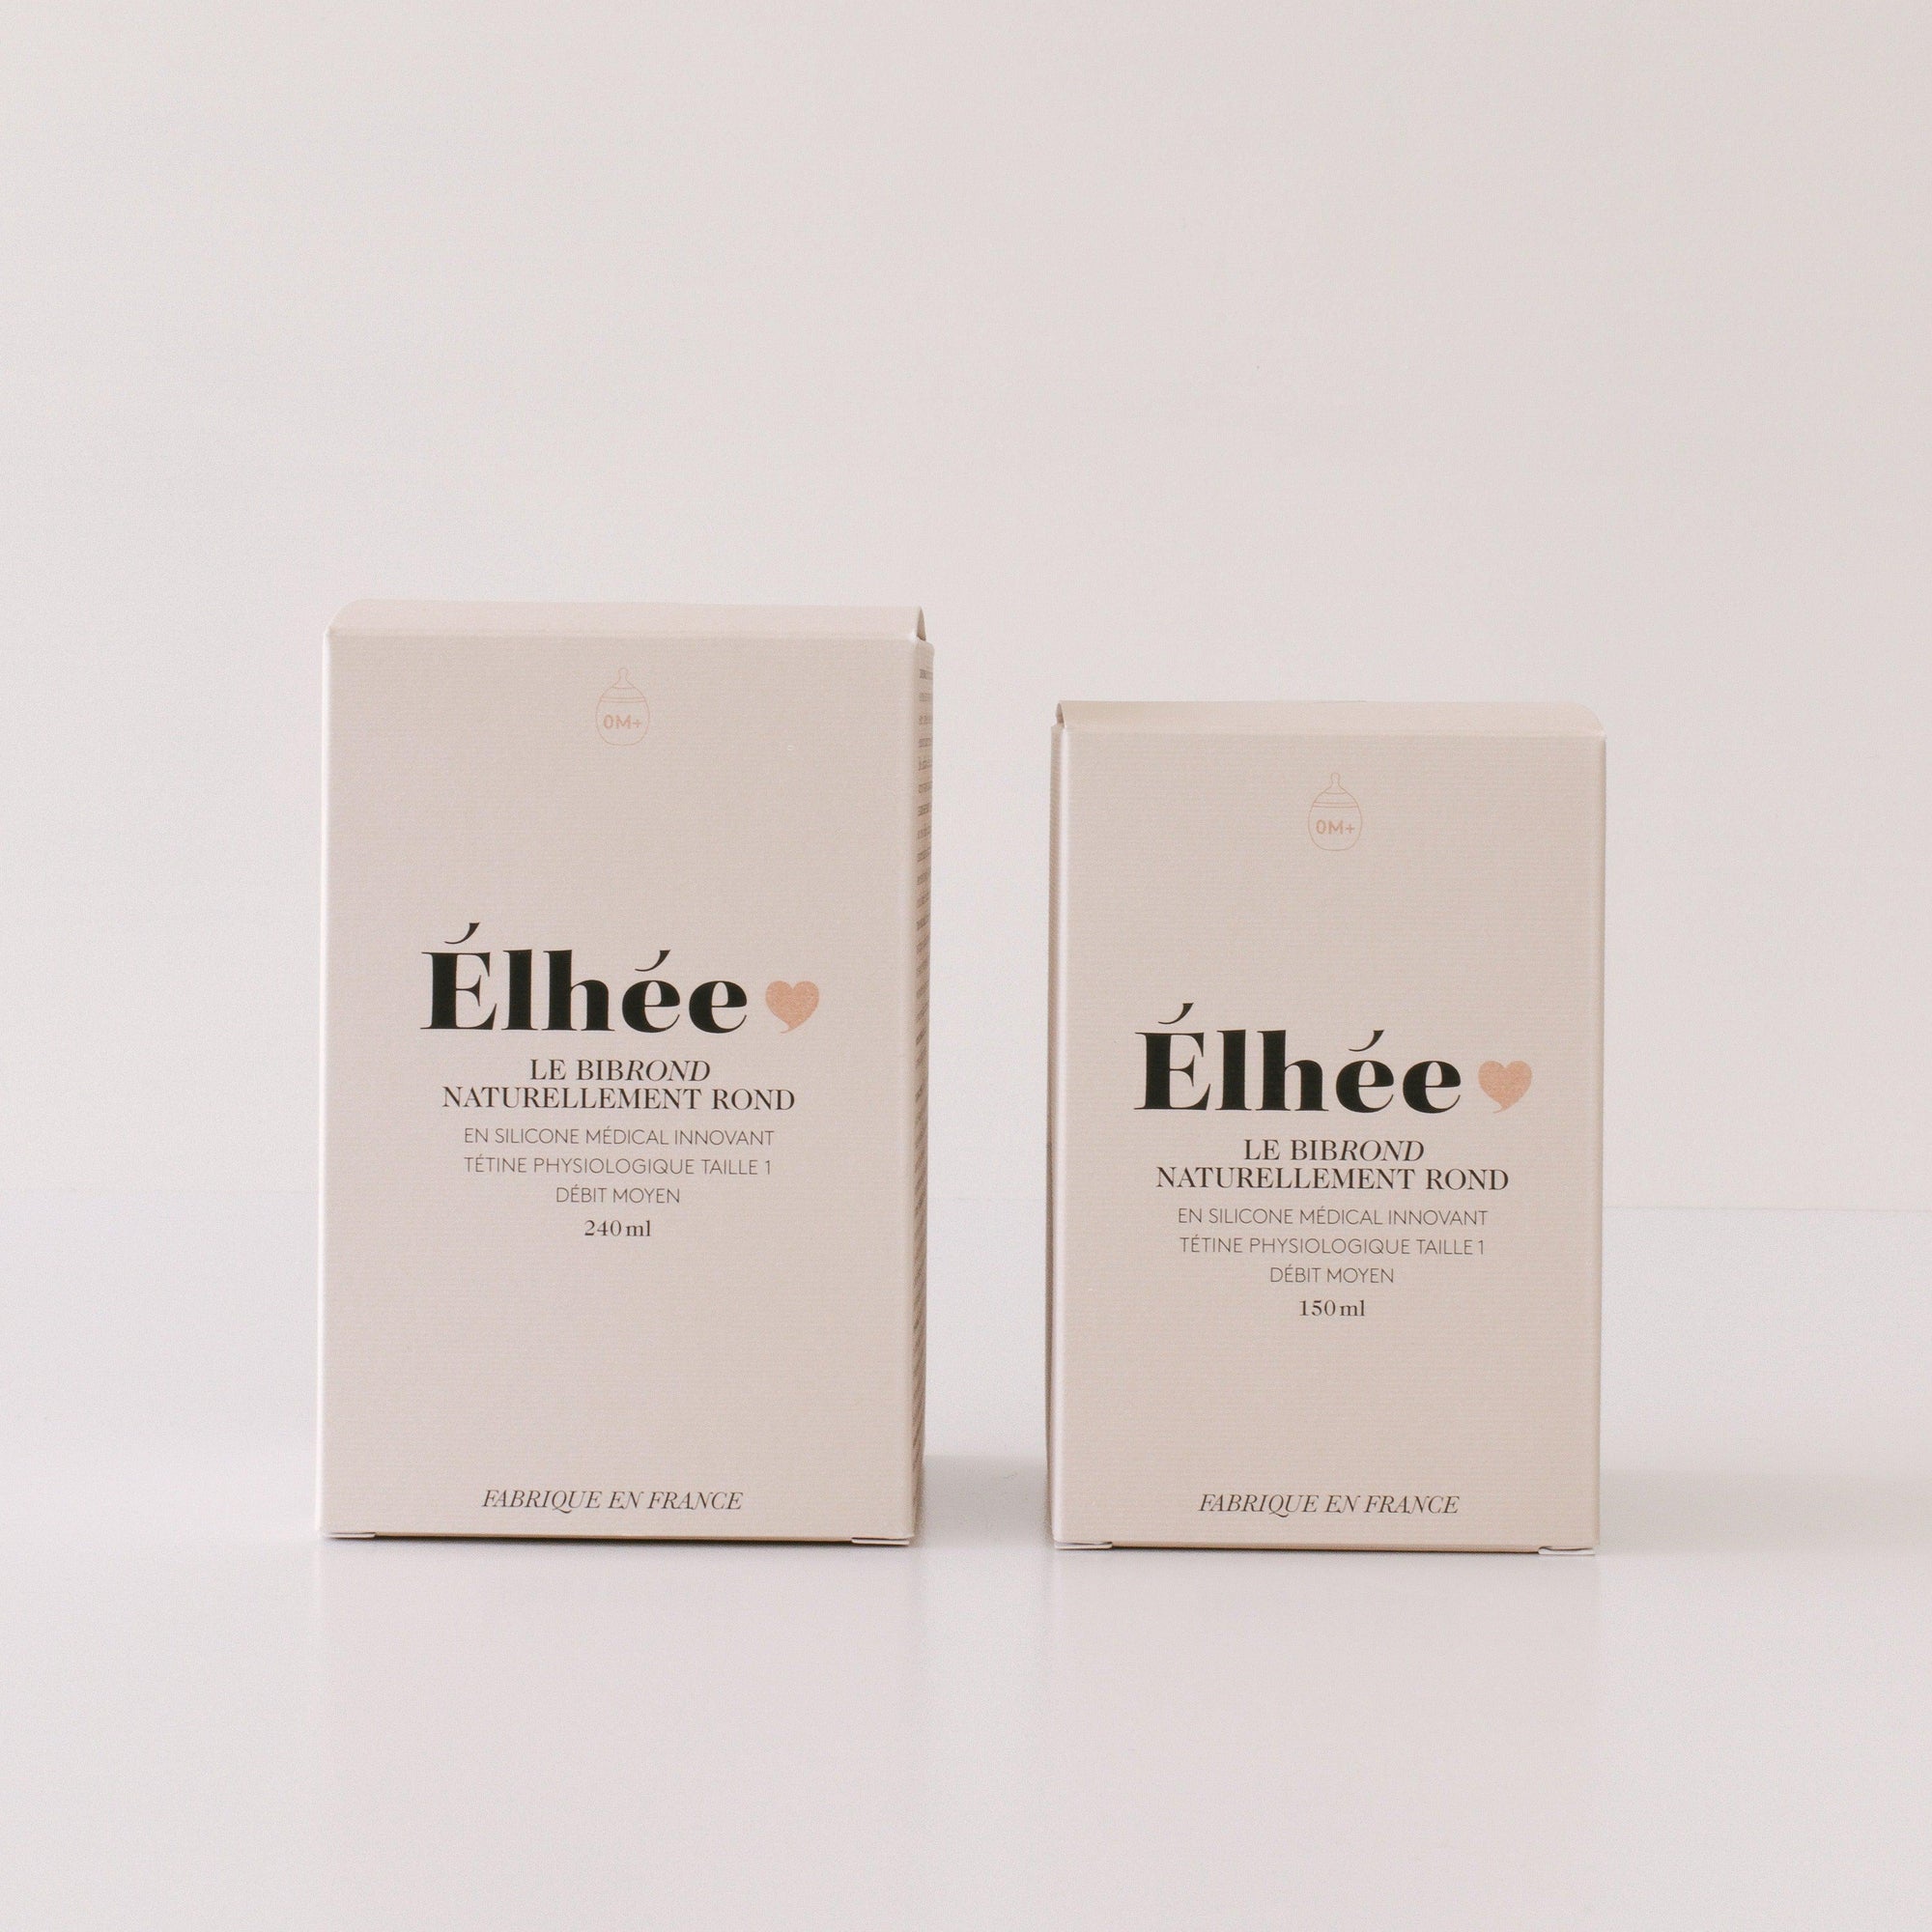 Two bibrond milk baby bottle boxes by Elhée France.